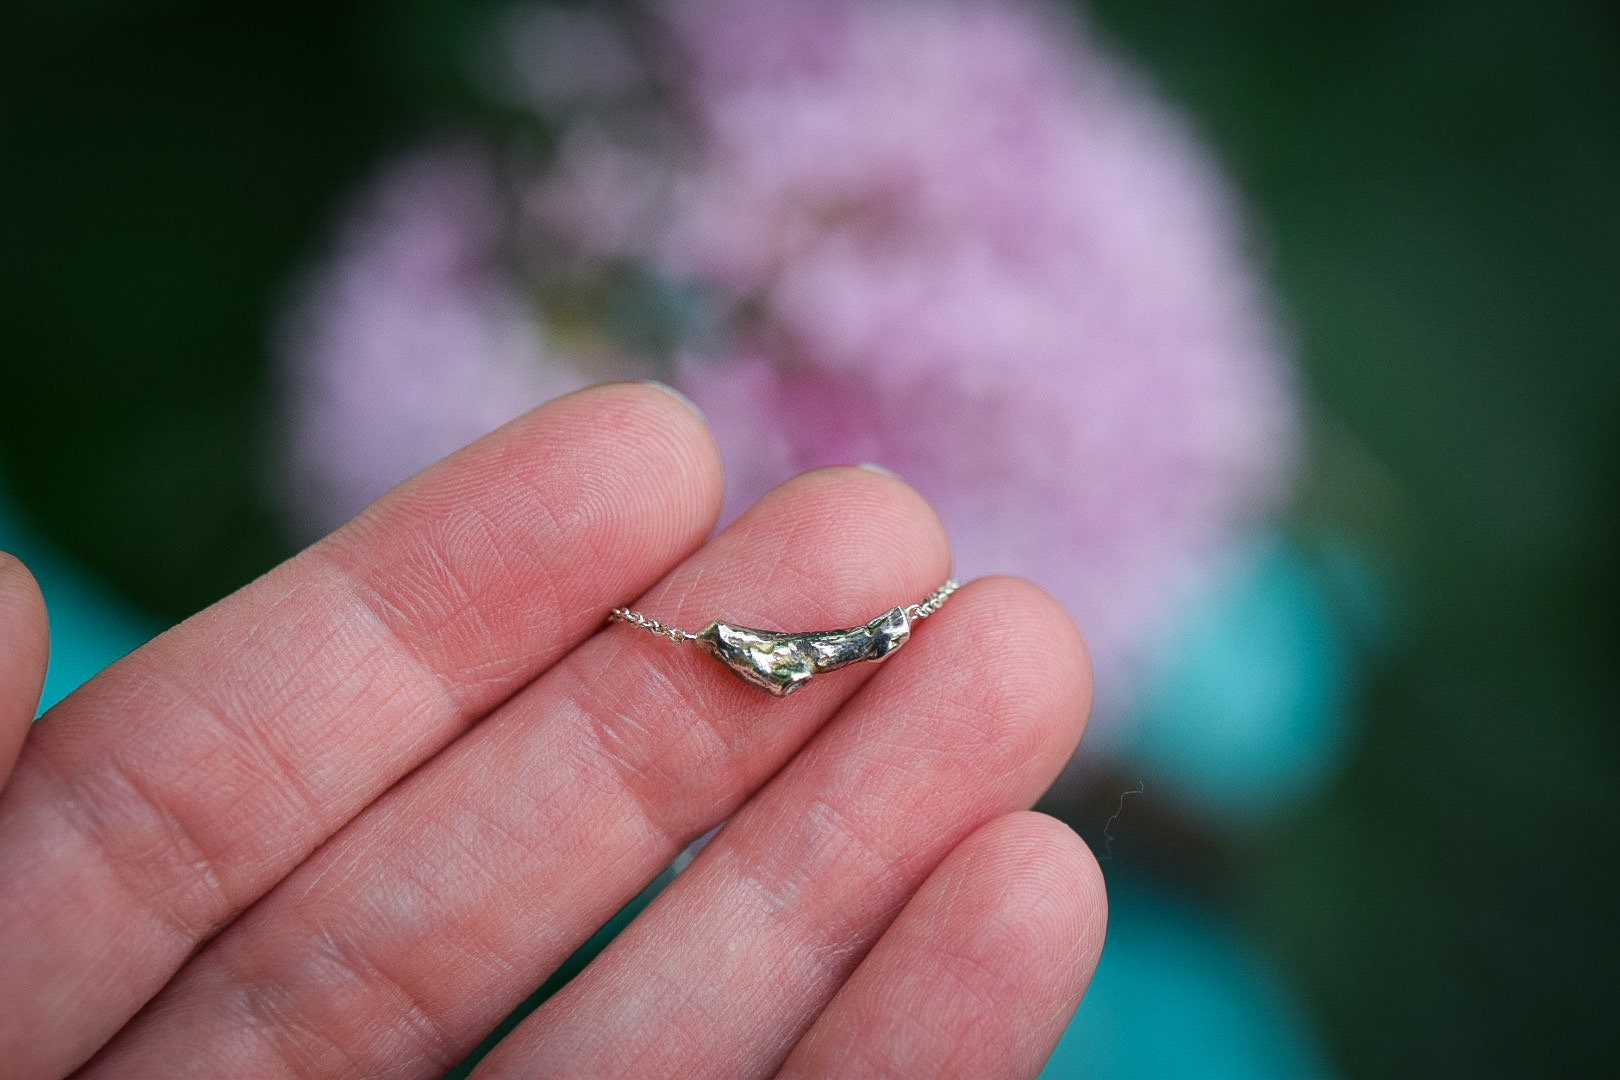 Tiny Branch Necklace/ Sterling Silver/ Small Twig Necklace